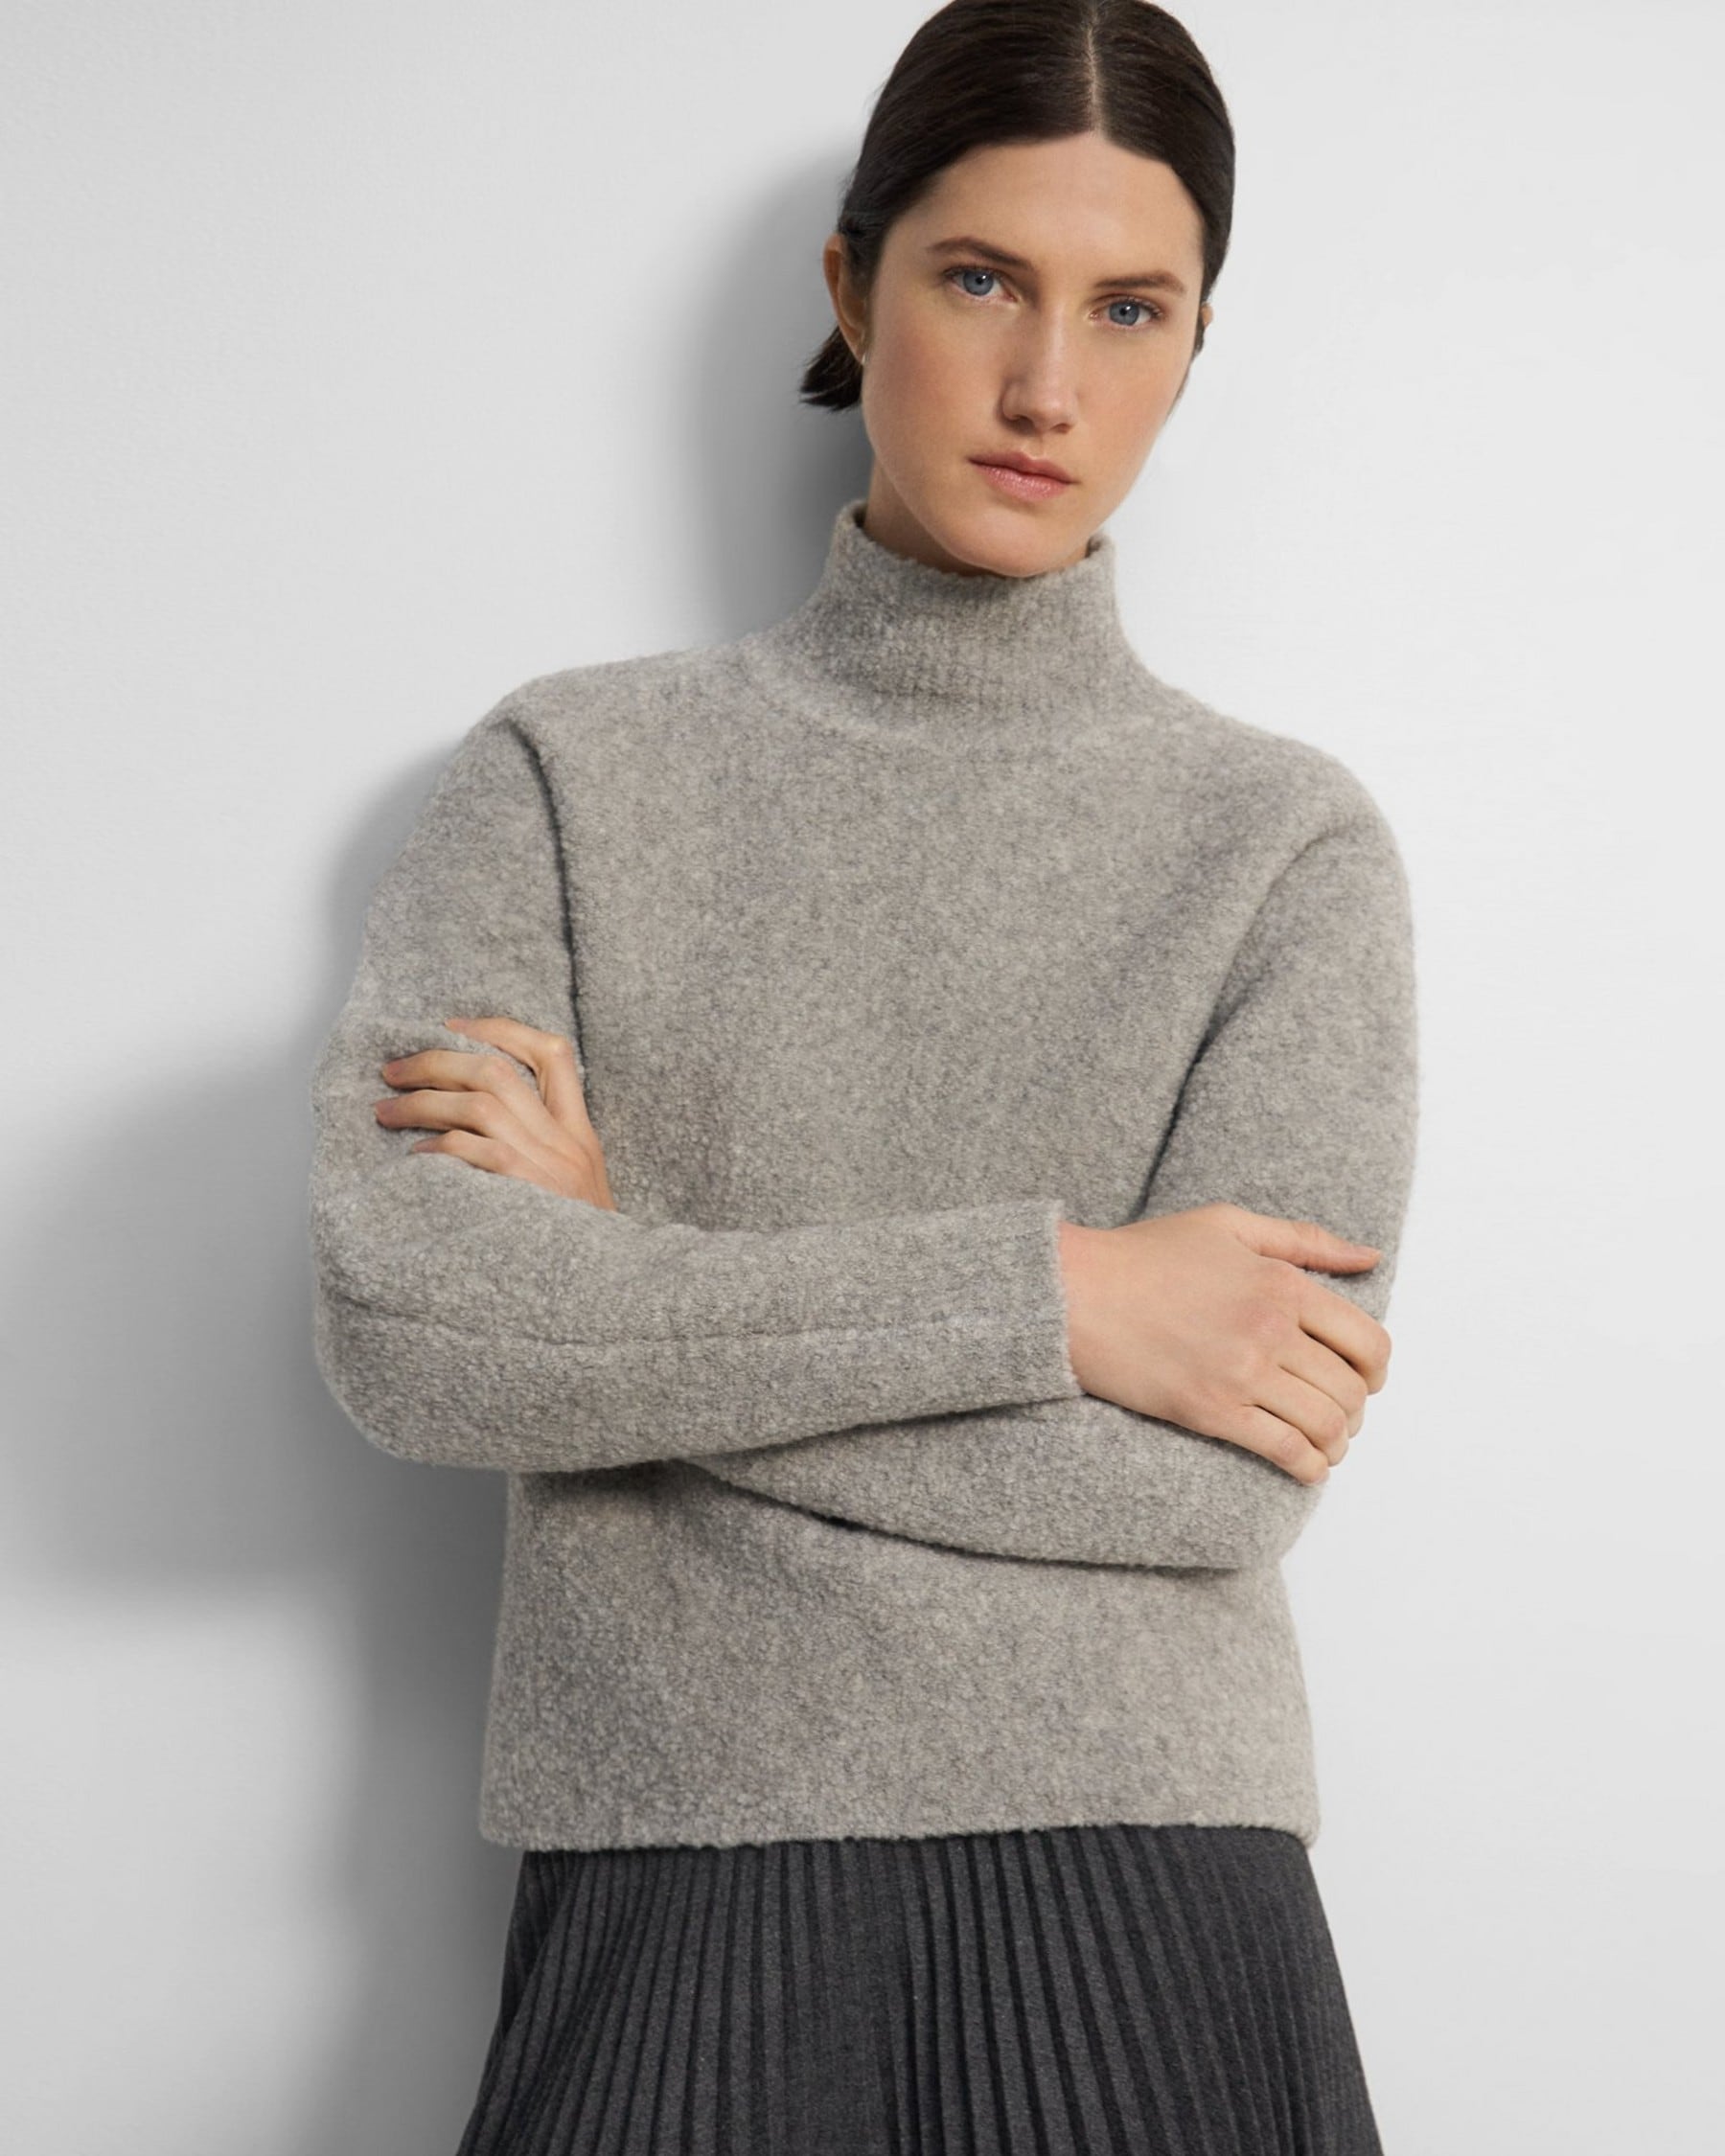 Theory Oversized Turtleneck Sweater in Wool Boucle